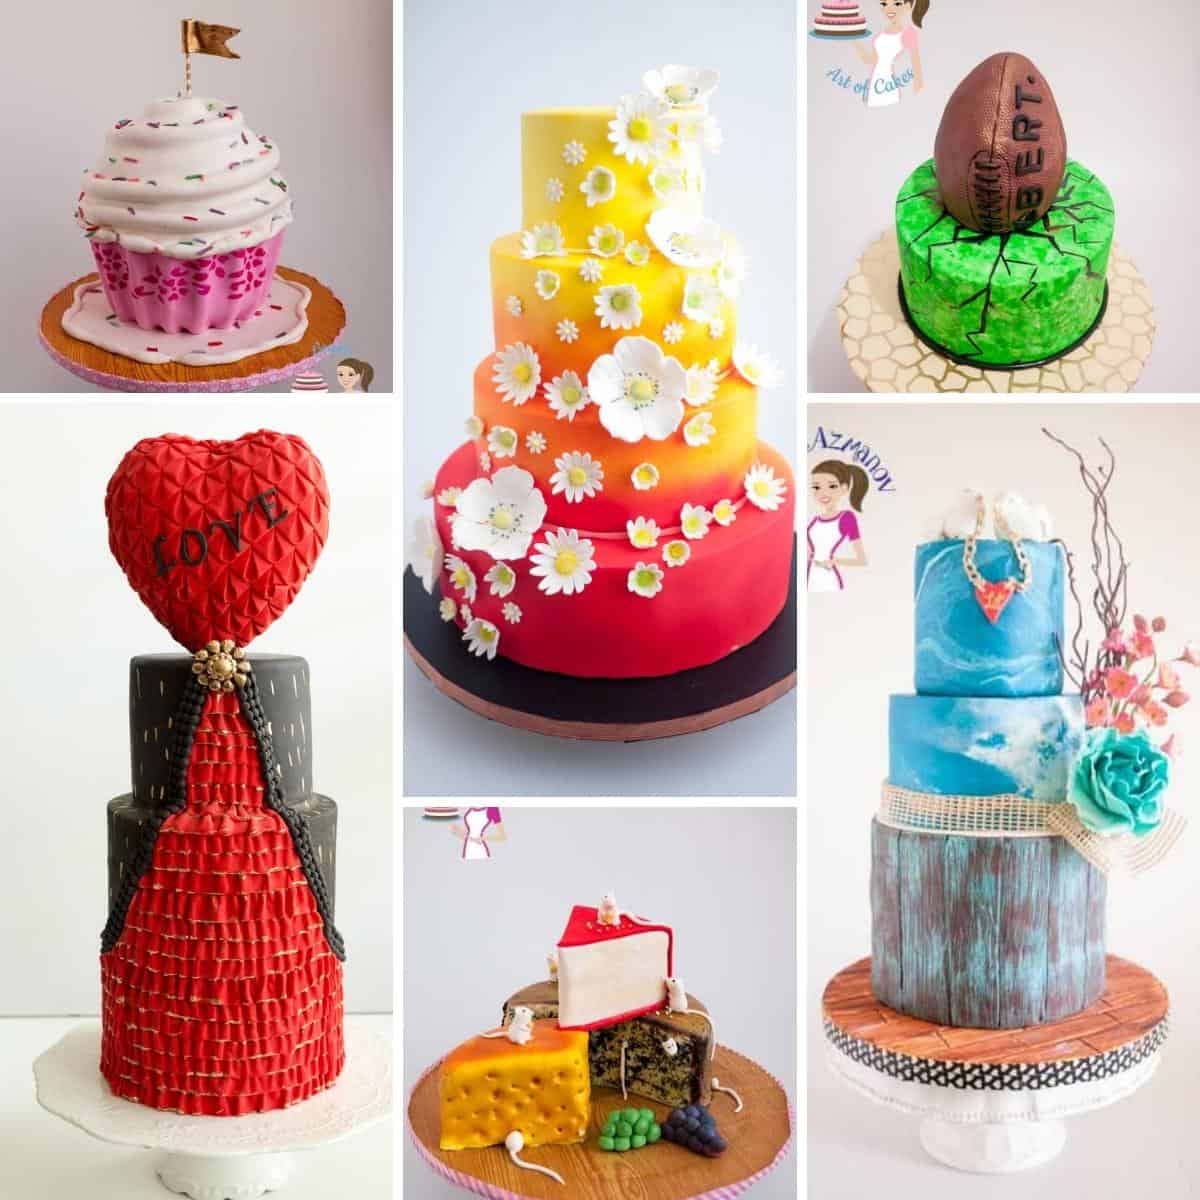 Collage of fondant decorated cakes.